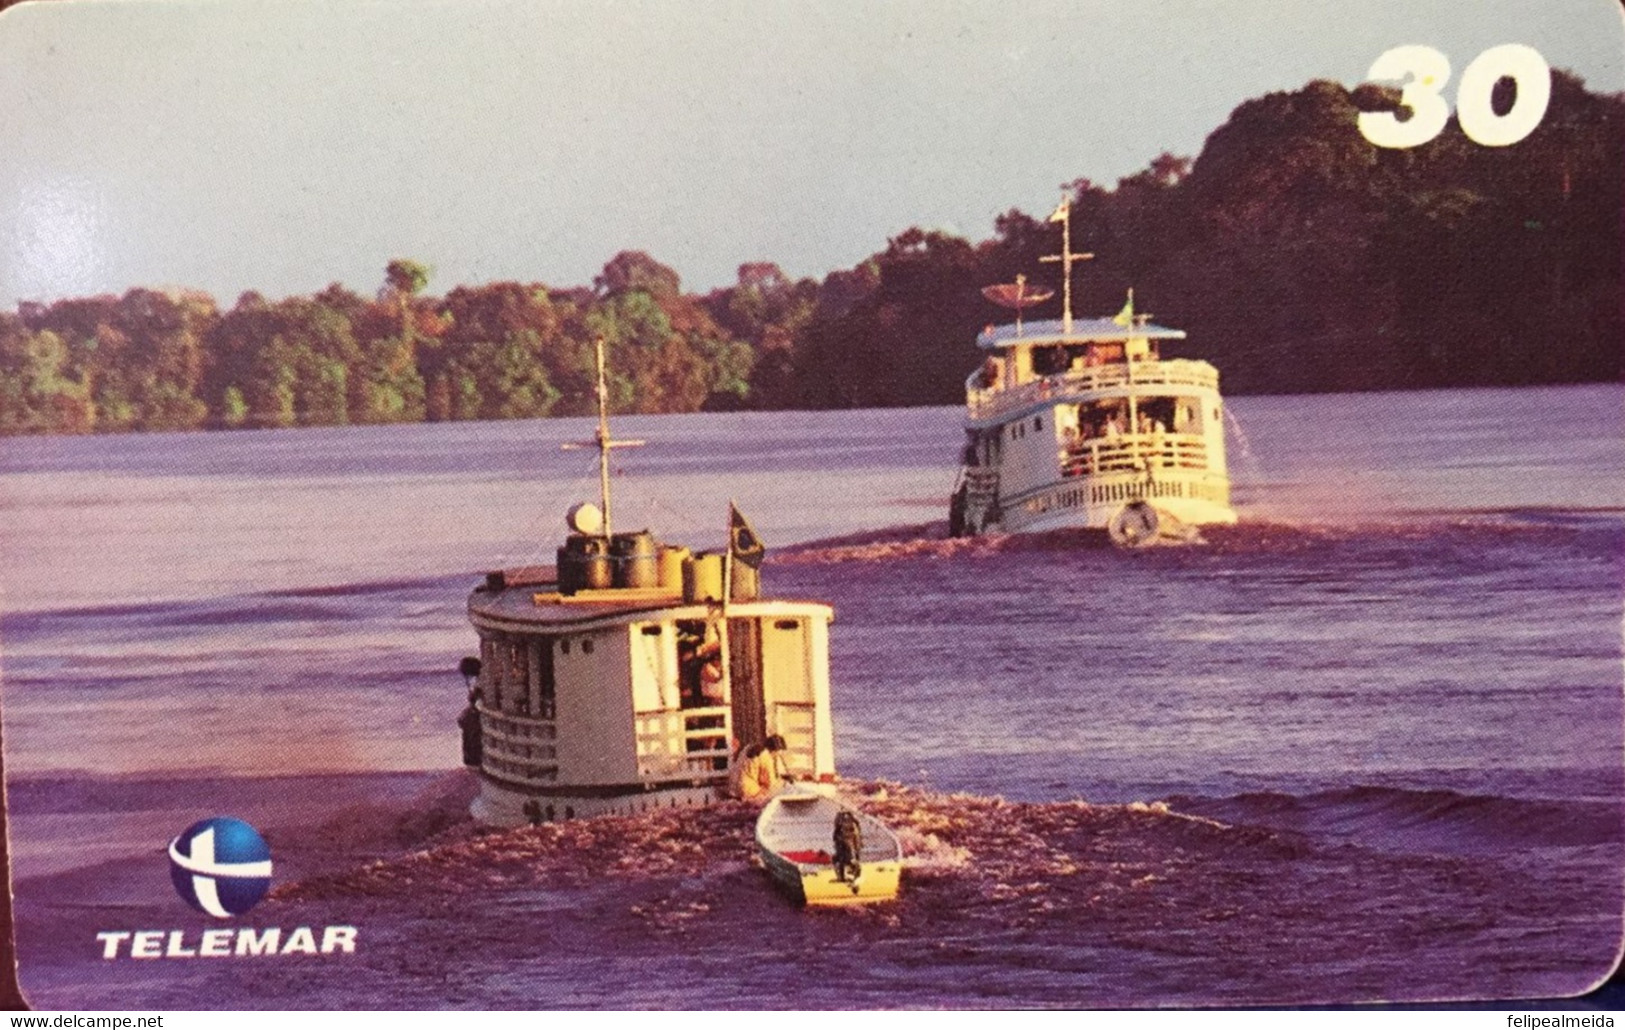 Phone Card Manufactured By Telemar In 1999 - Photo Regional Ships Amazonia - Cultural